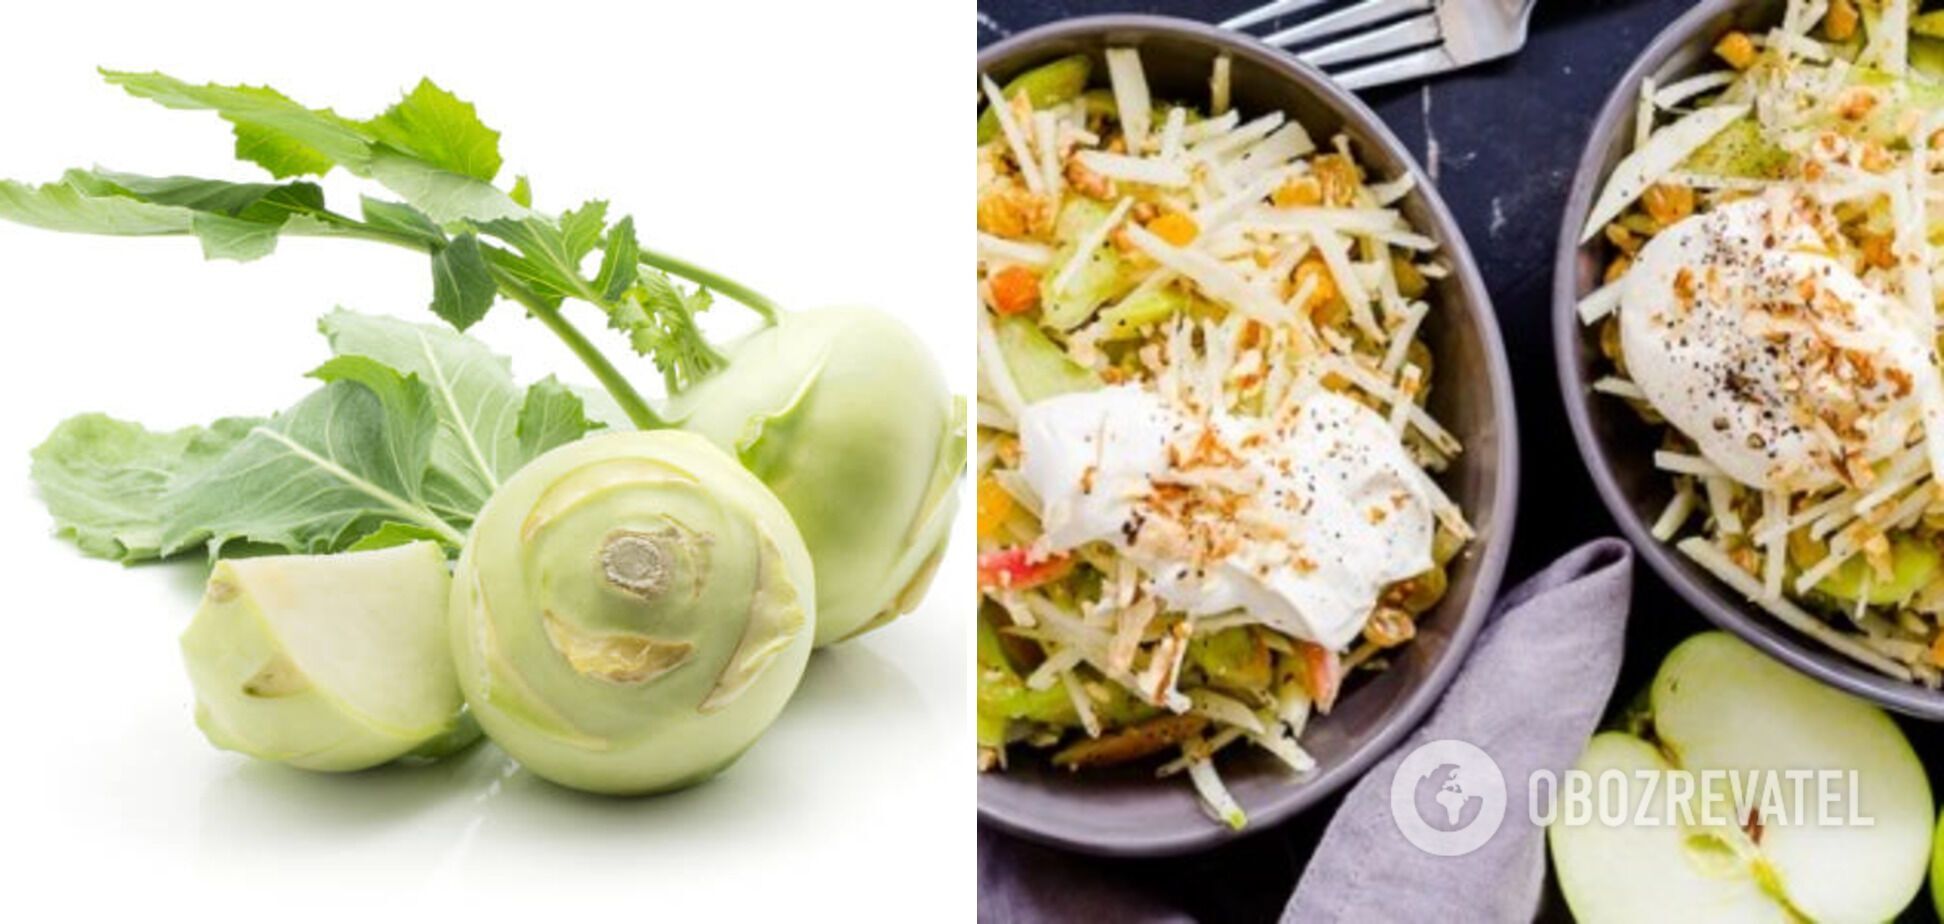 Salad with cabbage